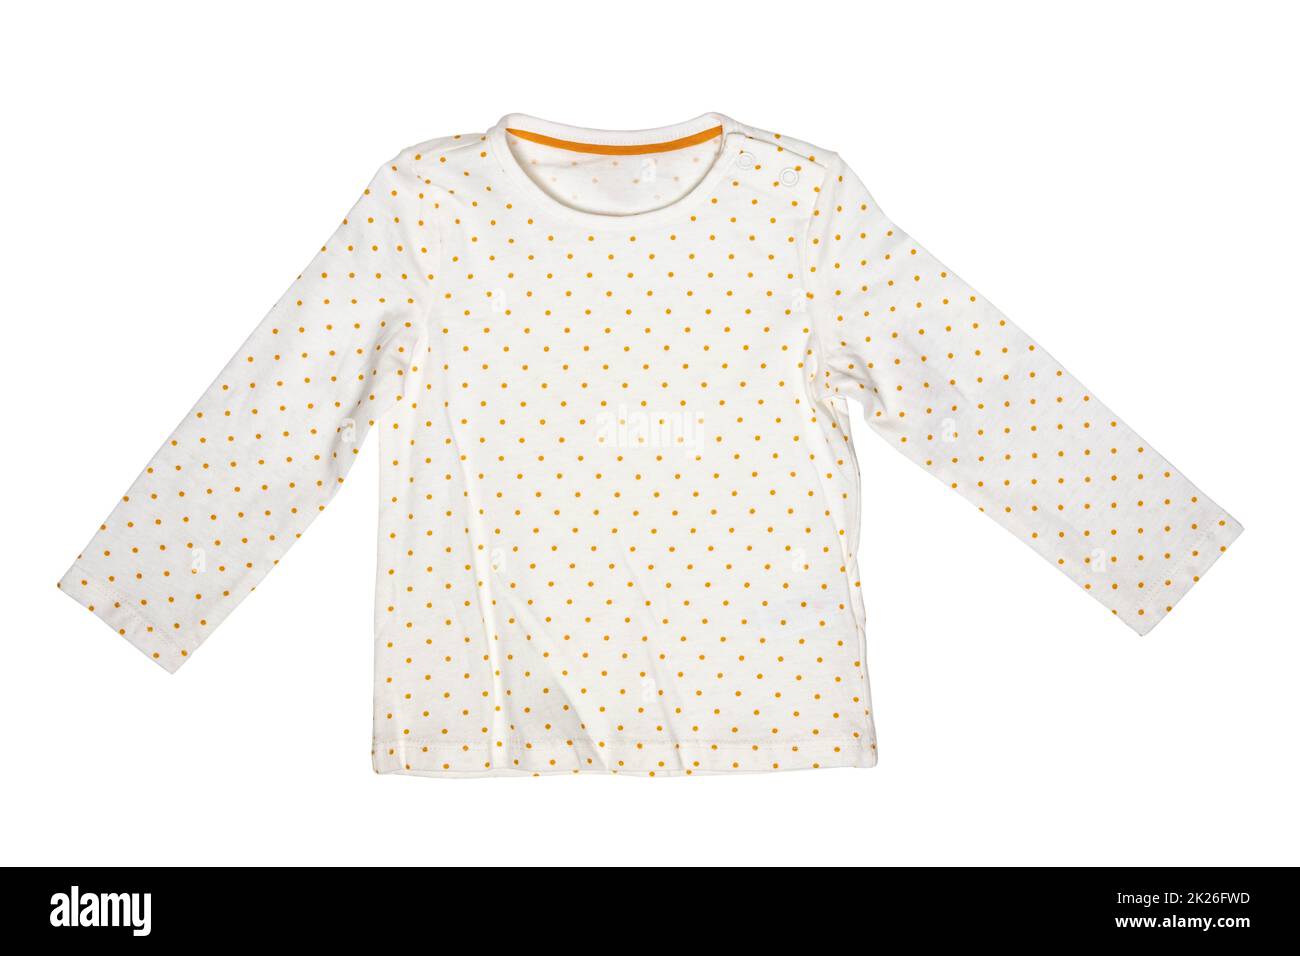 Summer shirt isolated. Closeup of a white baby girl shirt or t-shirt with yellow polka dots isolated on a white background. Children spring fashion. Stock Photo